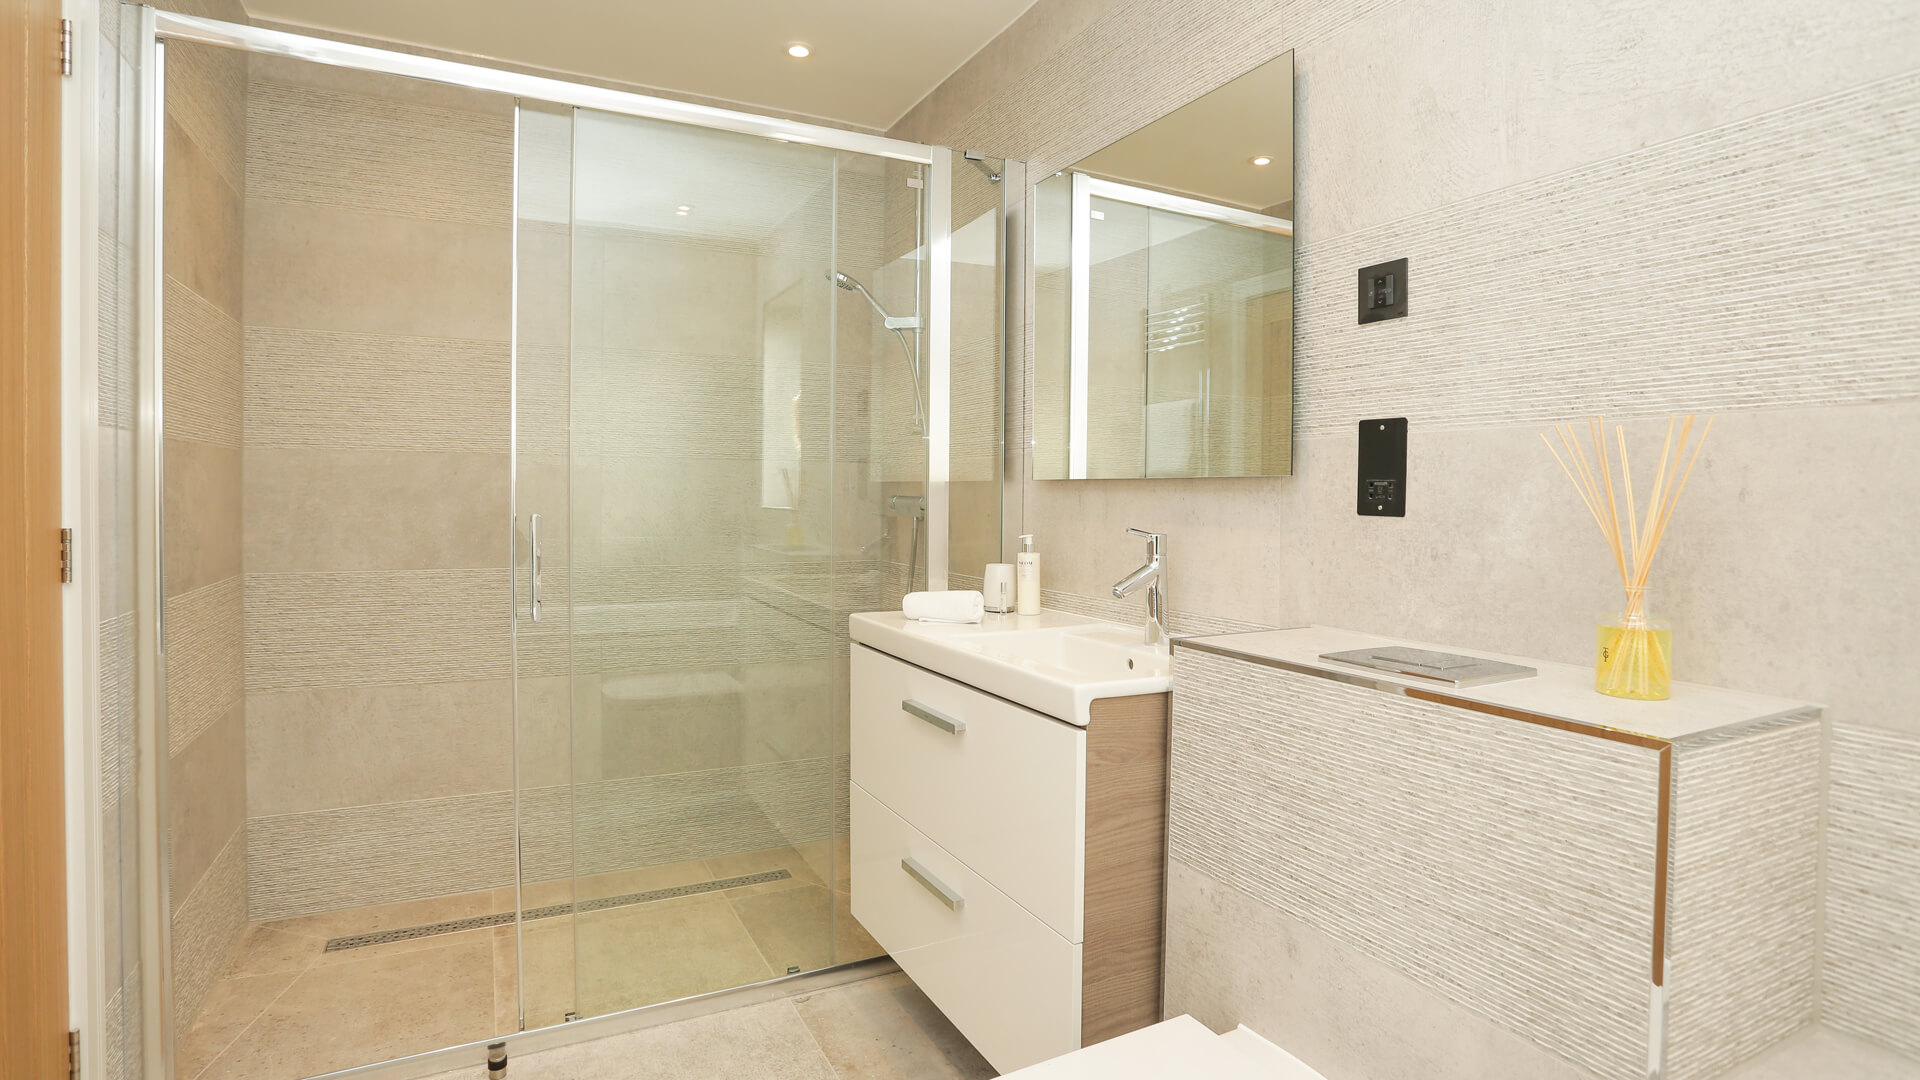 Ensuite with walk in shower at Plot 11 Weavers park.